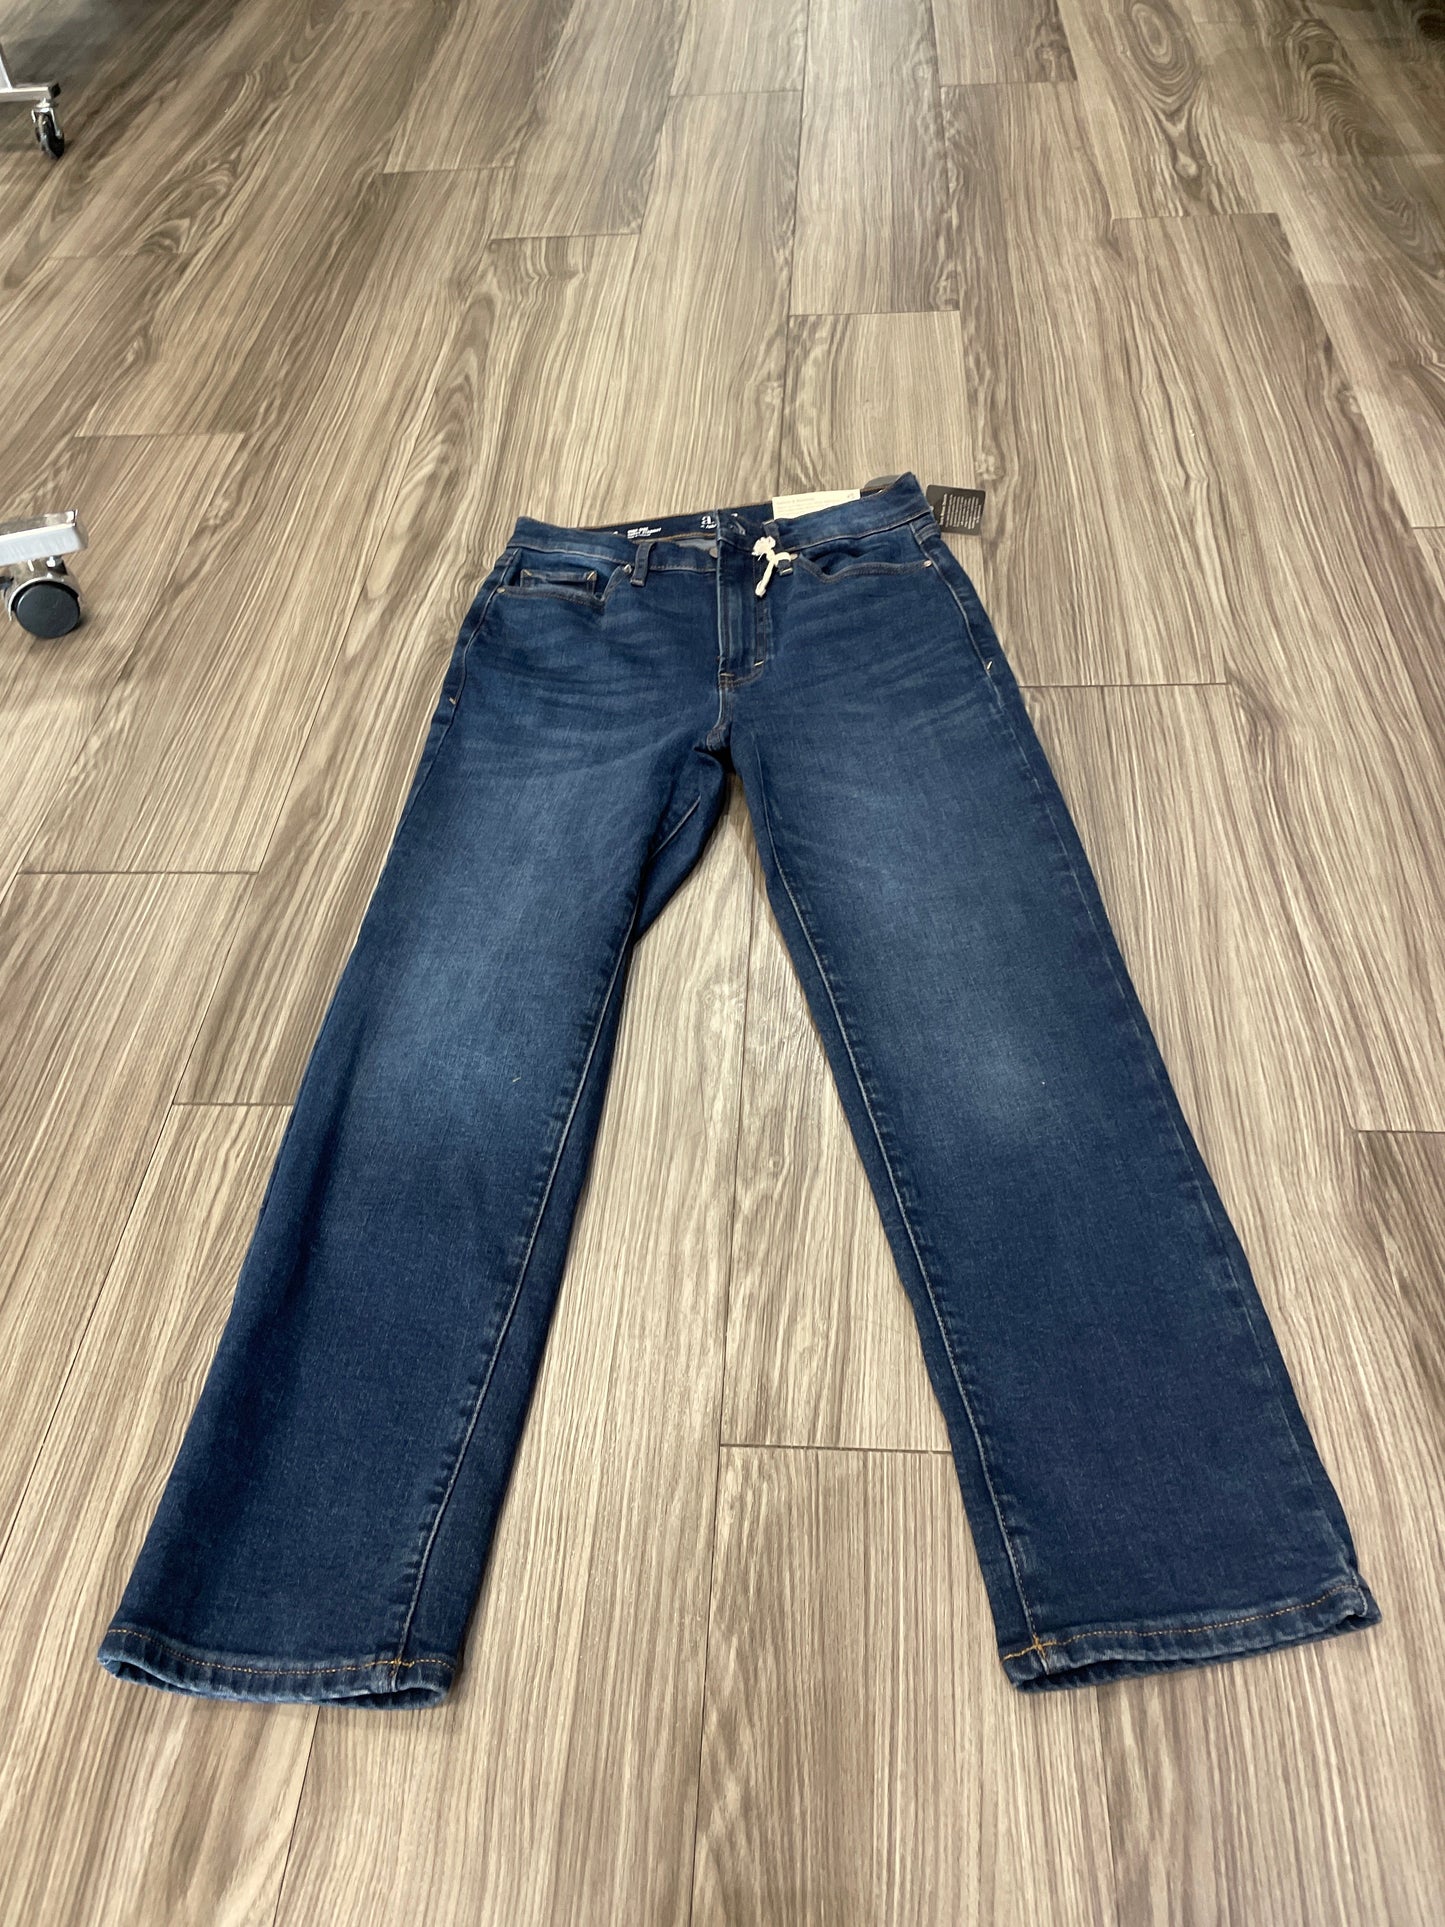 Blue Jeans Straight Ana, Size 6